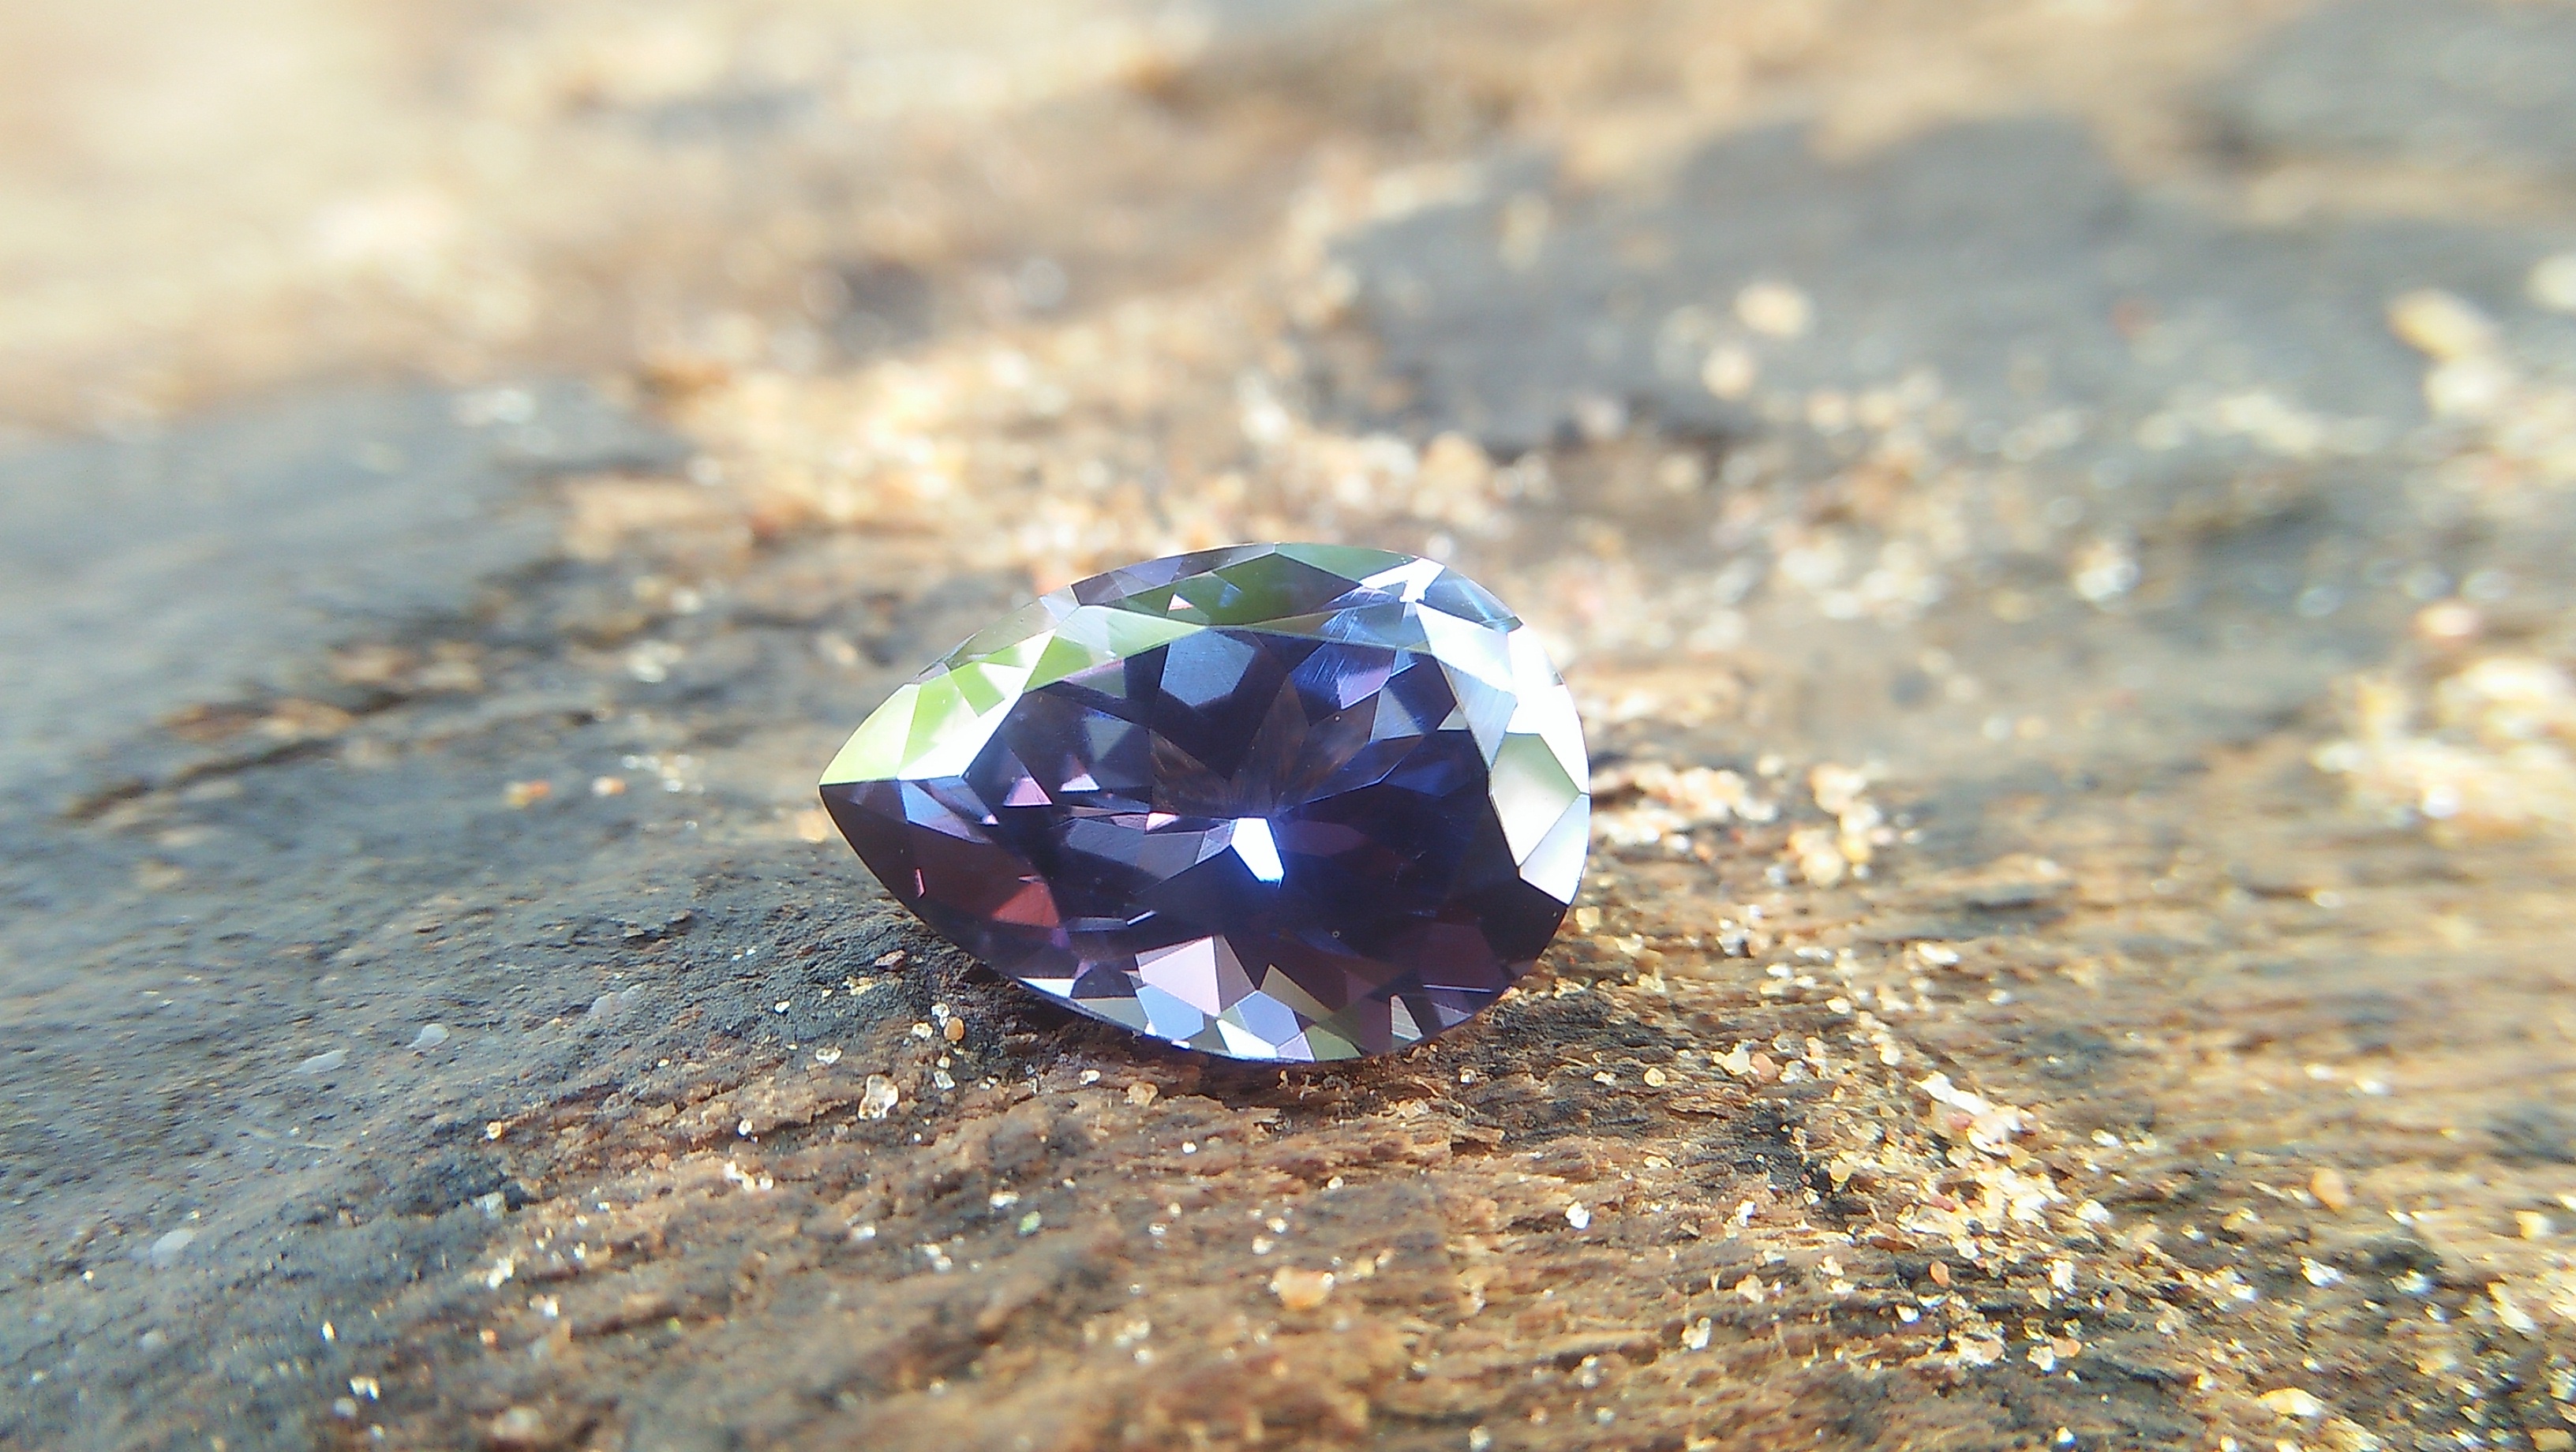 NATURAL BLUE SPINEL Shape : Pear Clarity : Very Clean Treatment : Natural/Unheated Dimension : 10.8mm x 7.5mm x 4.9mm Weight : 2.50 Cts Location : City of Gem Ratnapura Sri Lanka